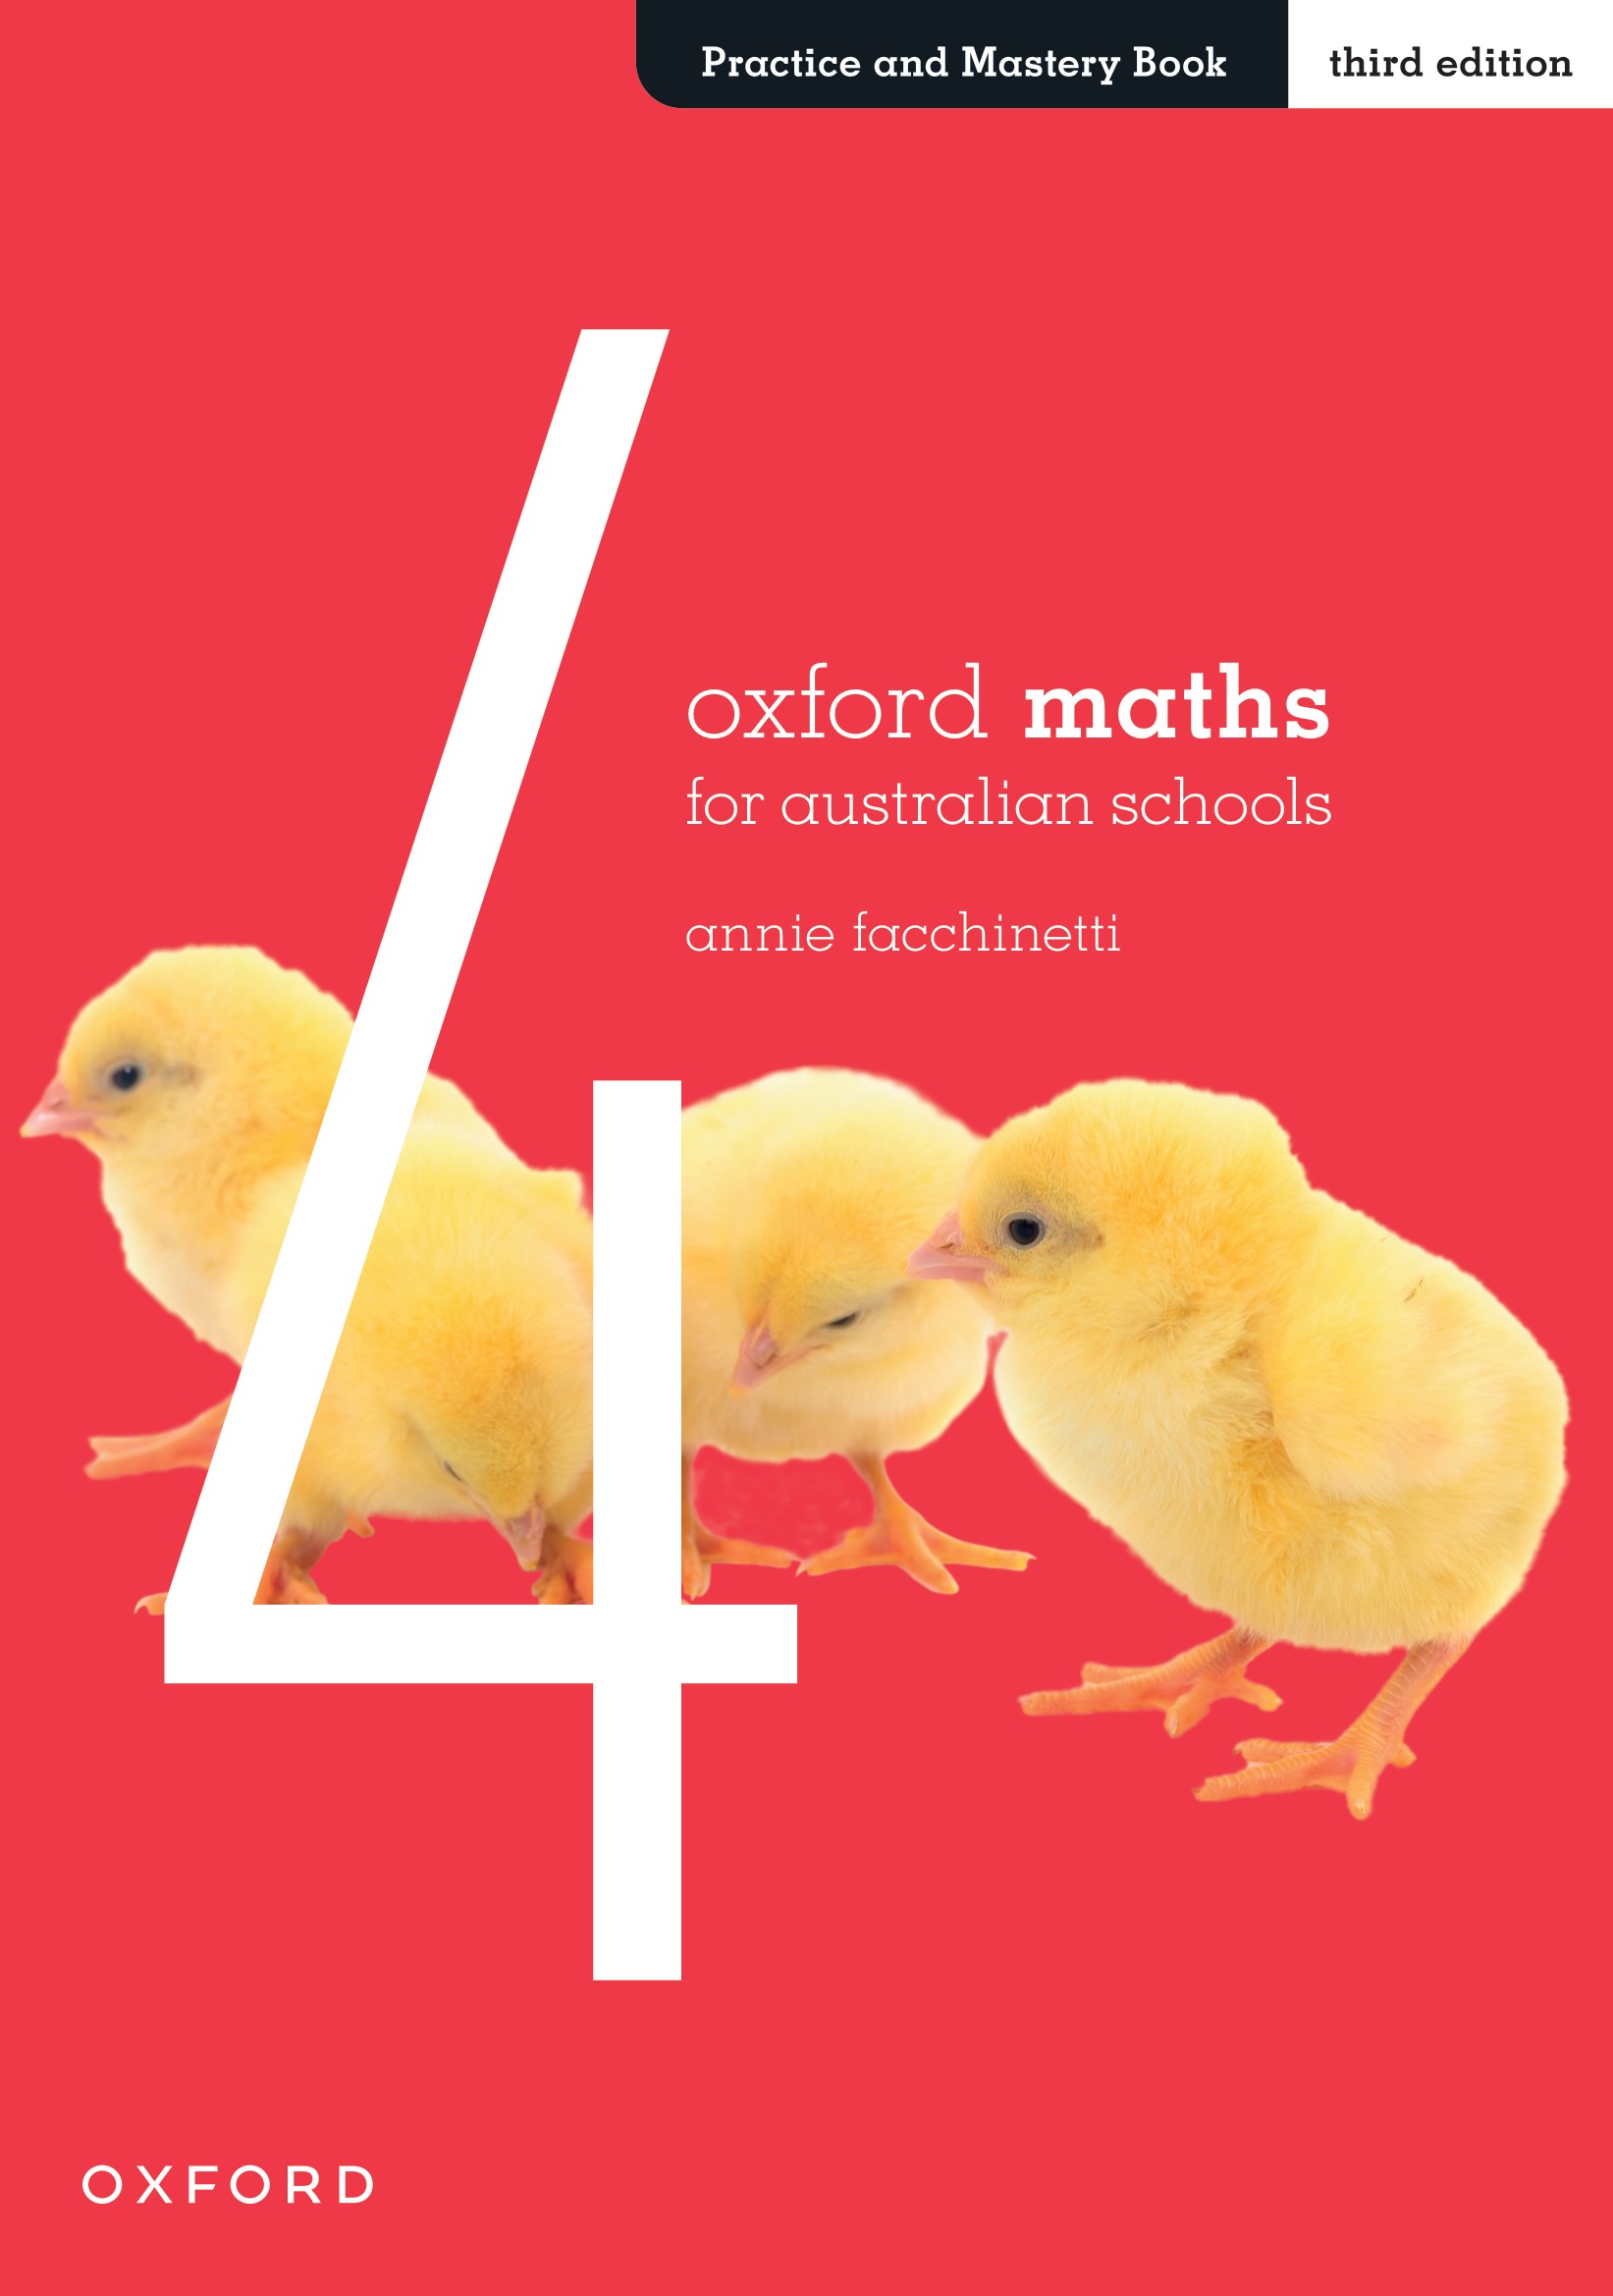 Oxford Maths Practice and Mastery Book Year 4